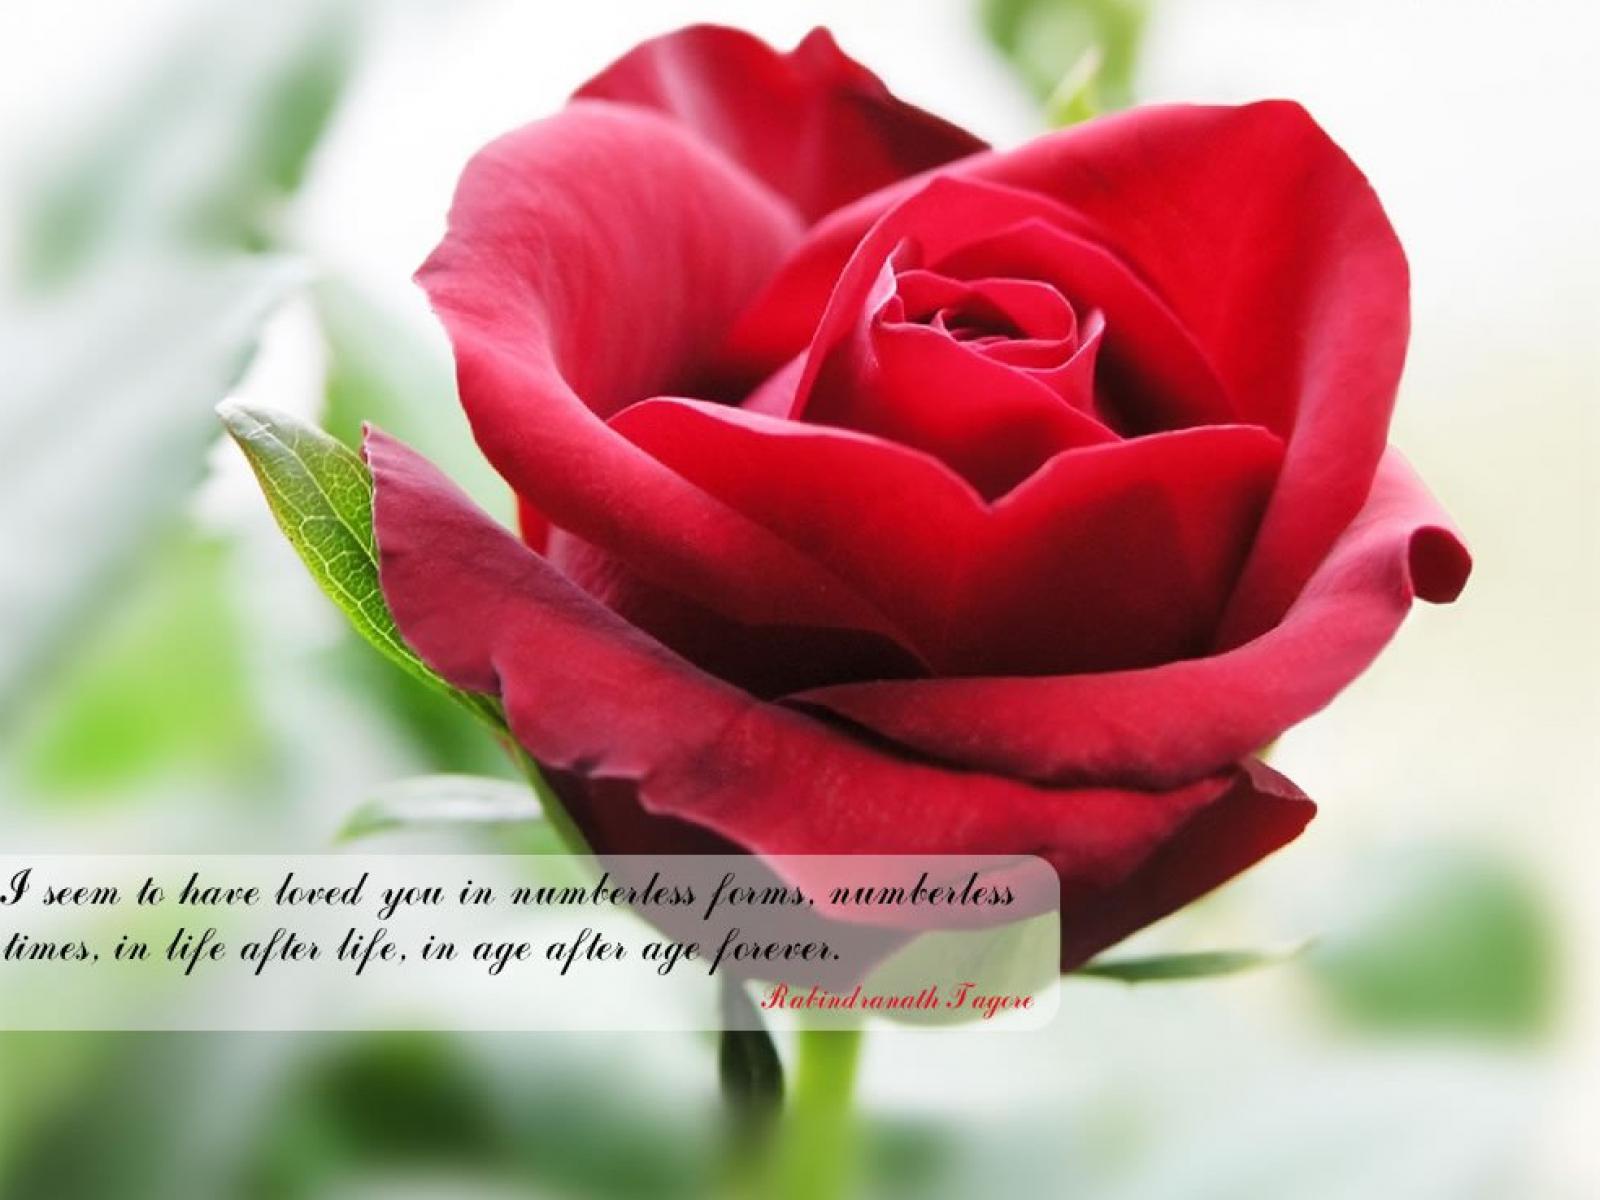 Best Rose Quotes To Show Your Love